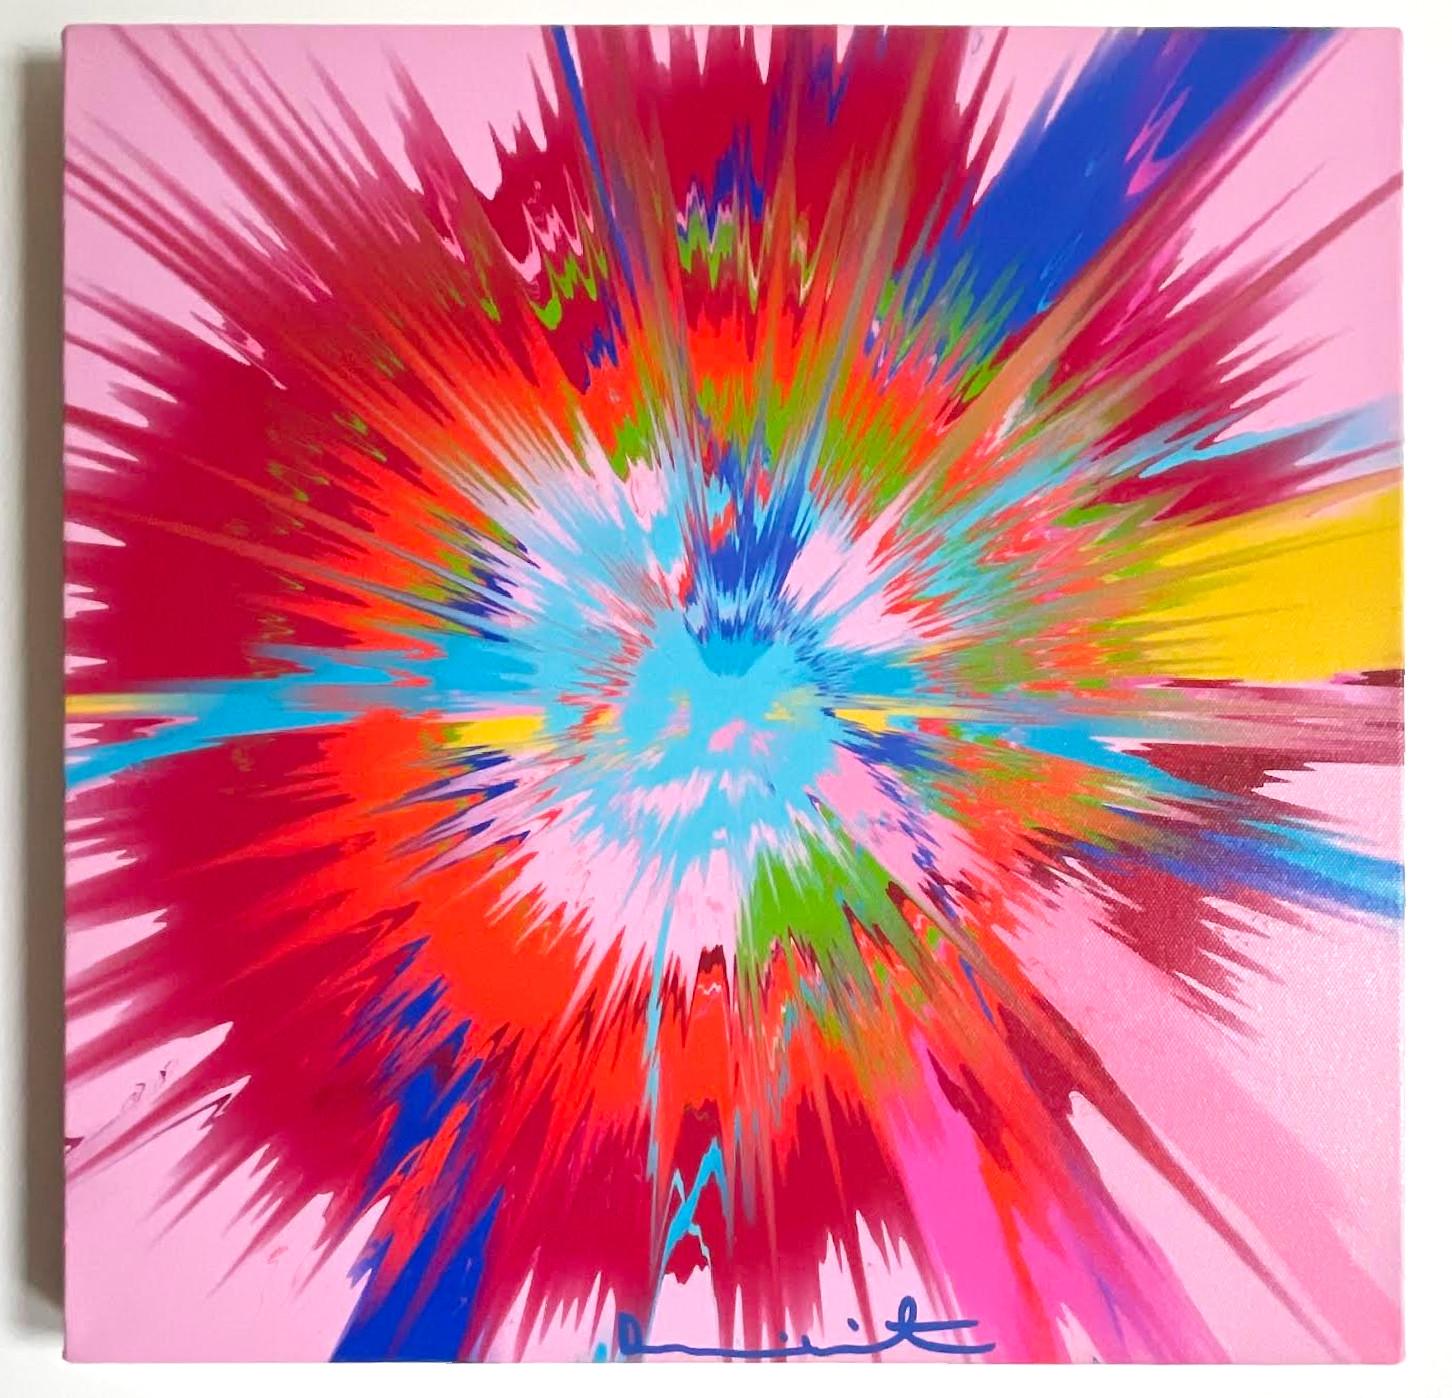 Damien Hirst Abstract Print - Vapor painting, hand signed 21/230 (Unique variant) from The Beautiful Paintings